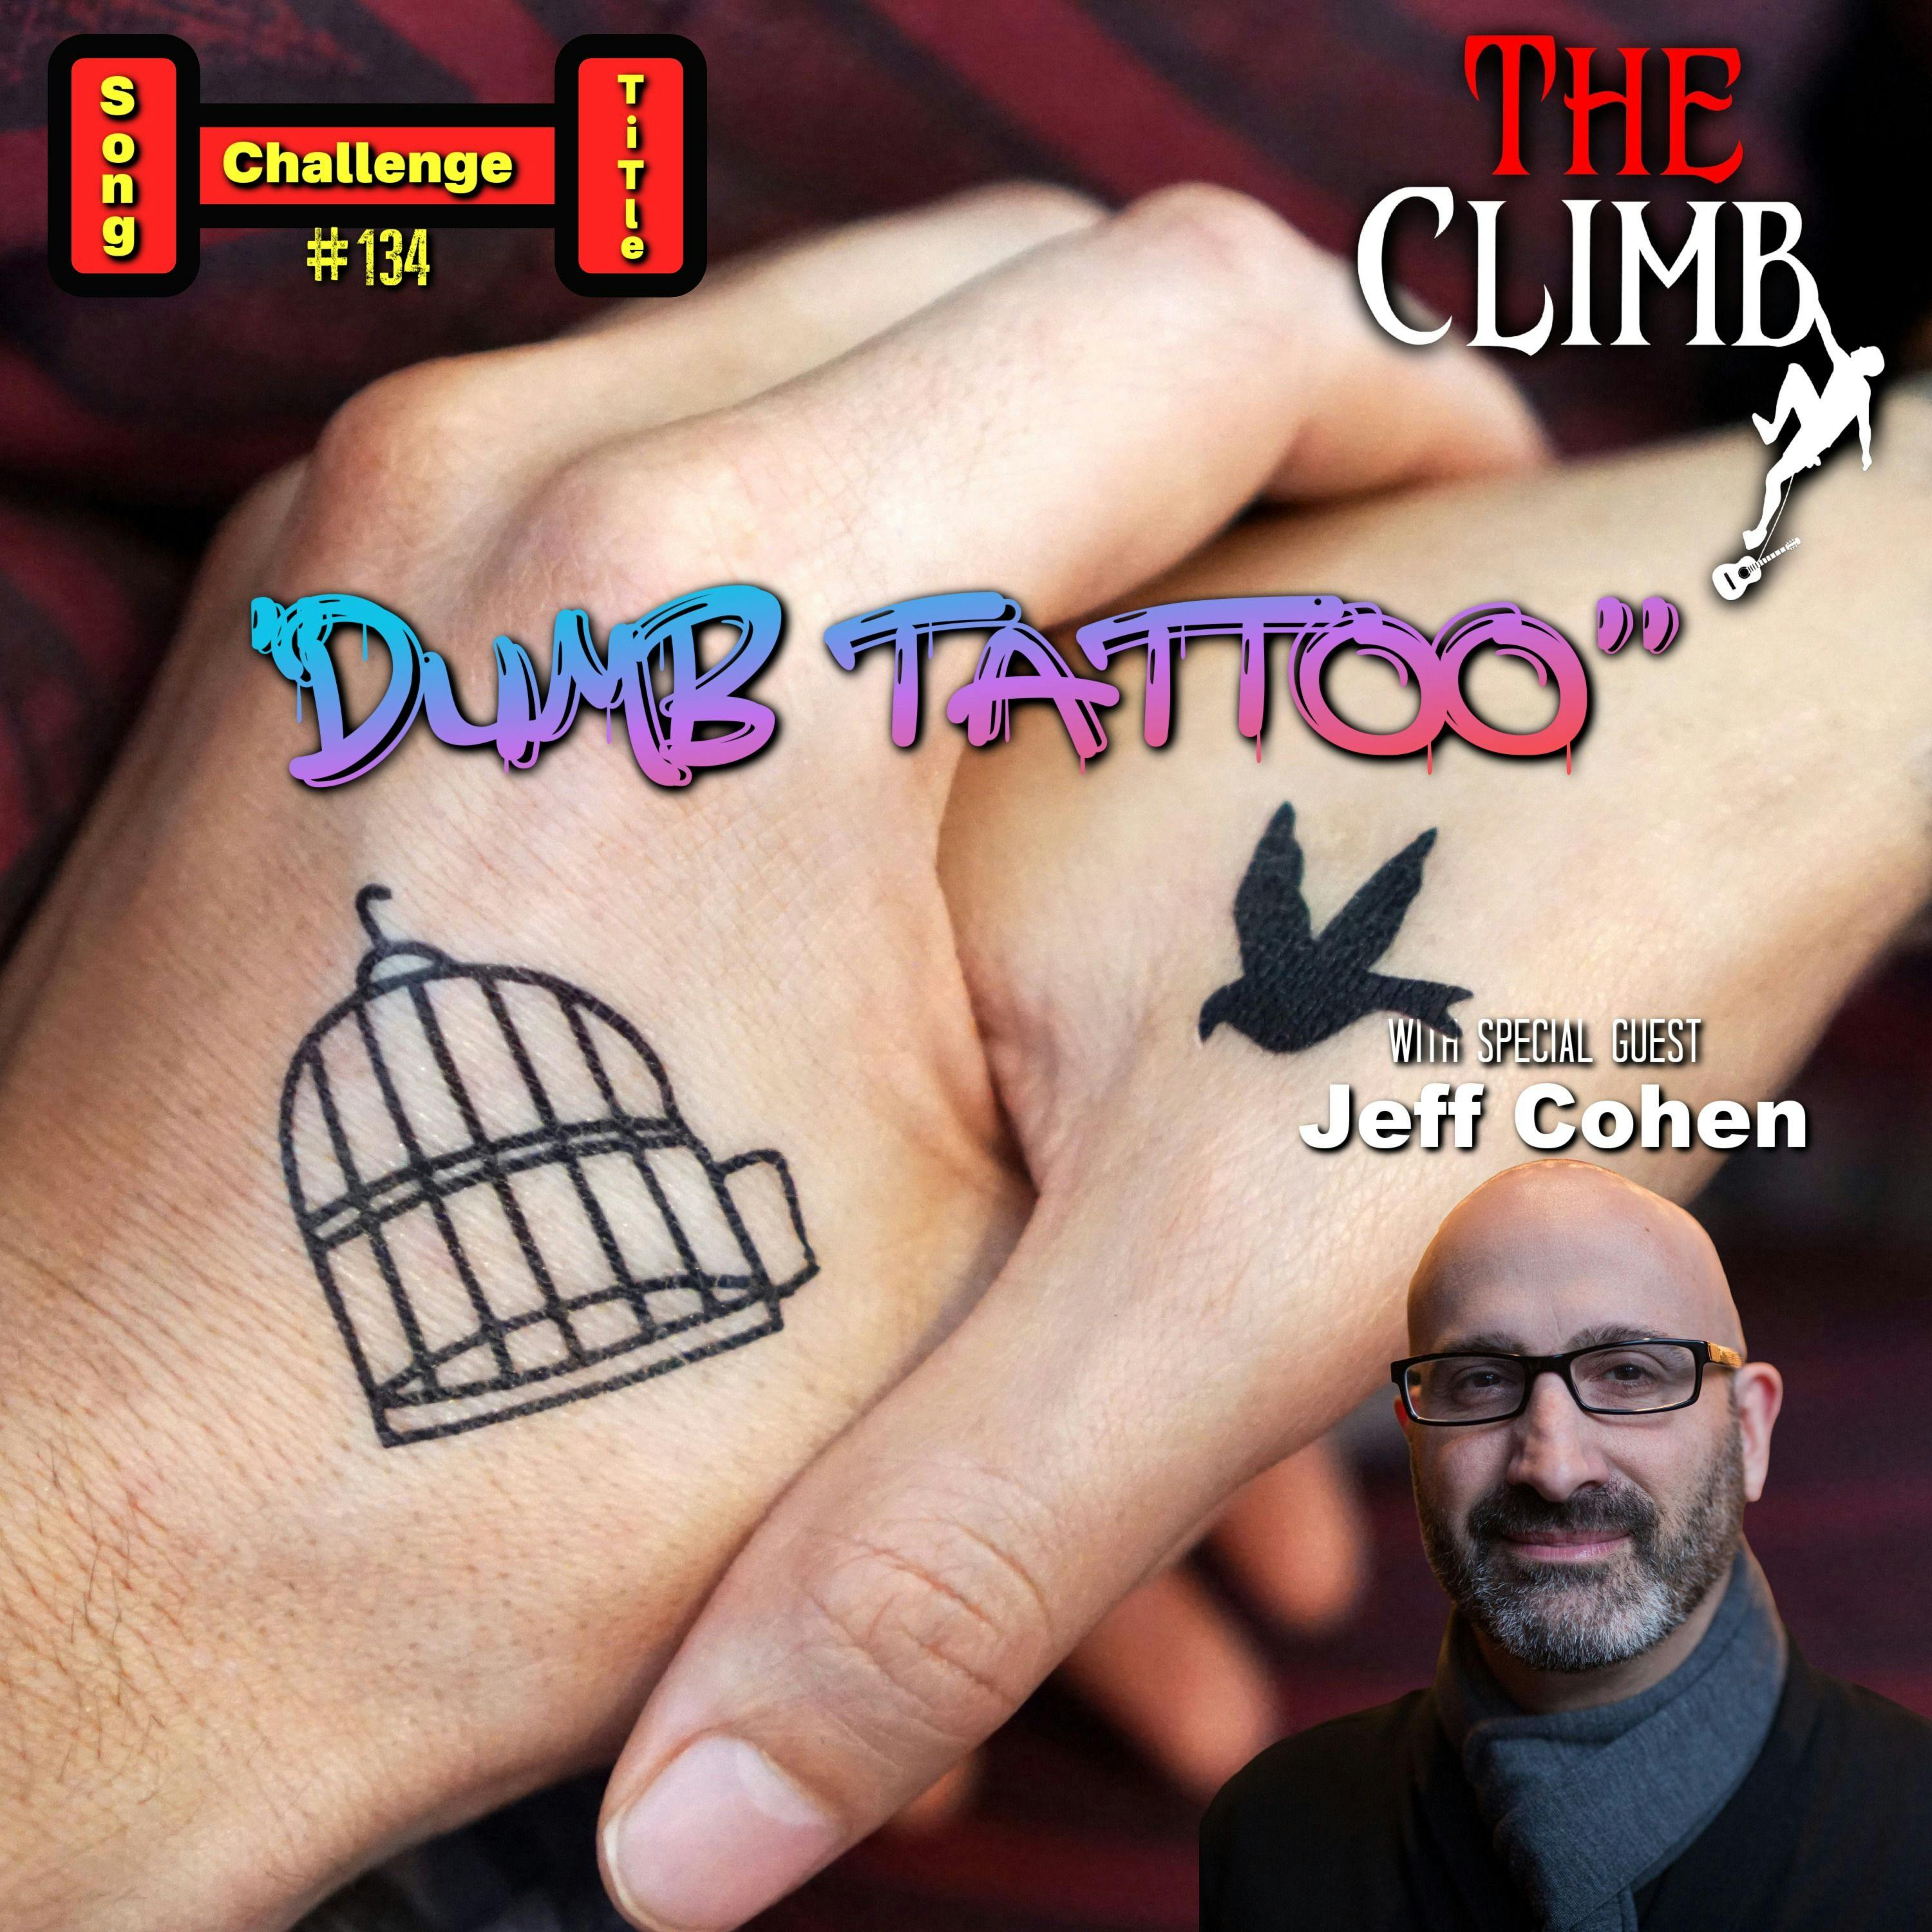 Song Title Challenge #134: ”Dumb Tattoo” with Jeff Cohen